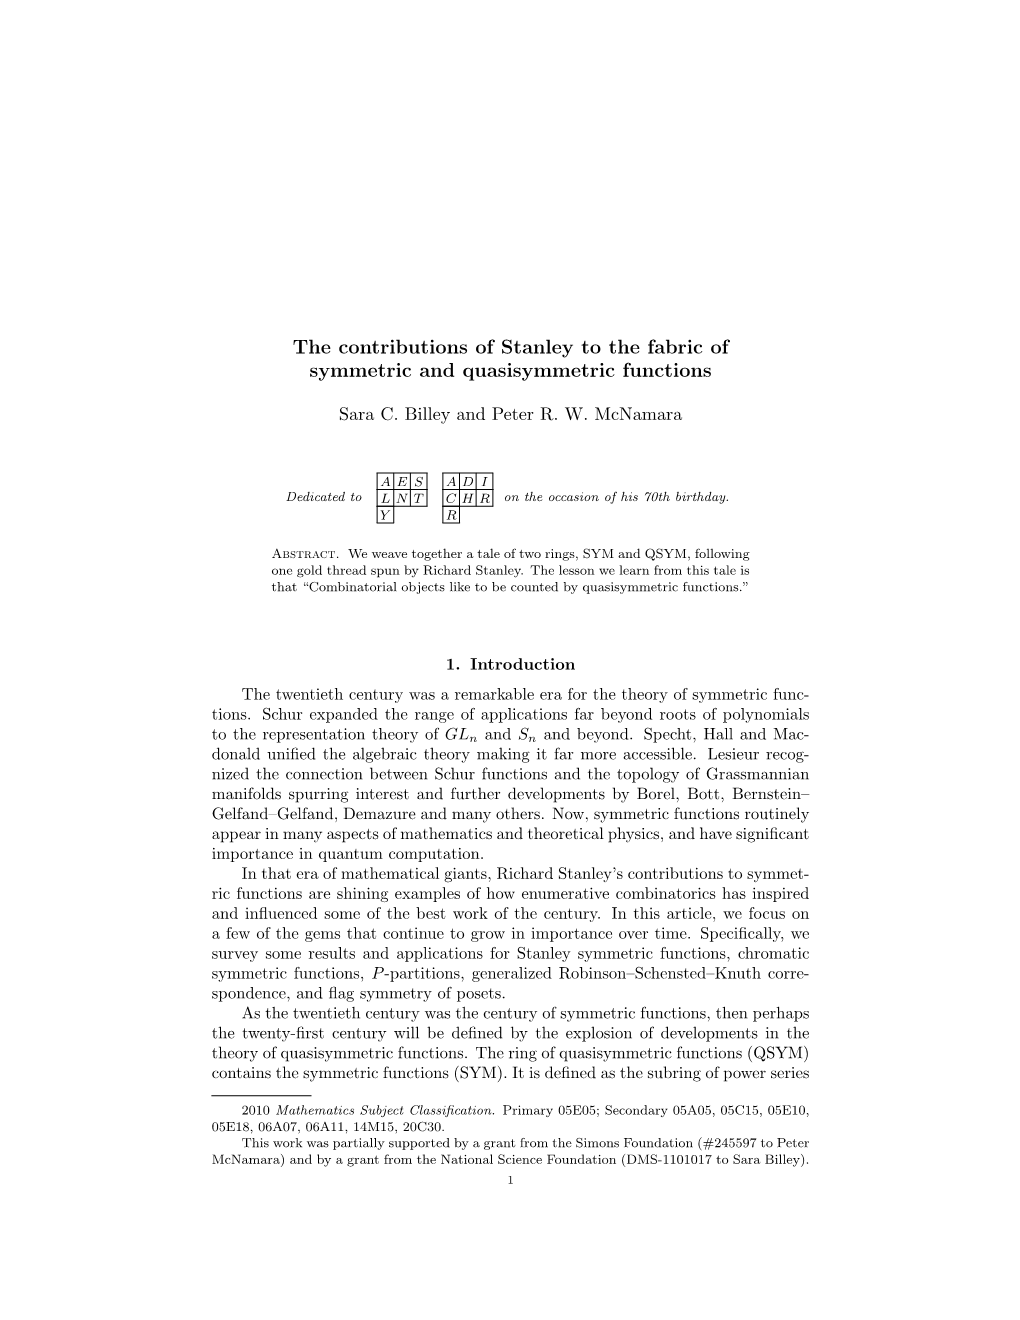 The Contributions of Stanley to the Fabric of Symmetric and Quasisymmetric Functions